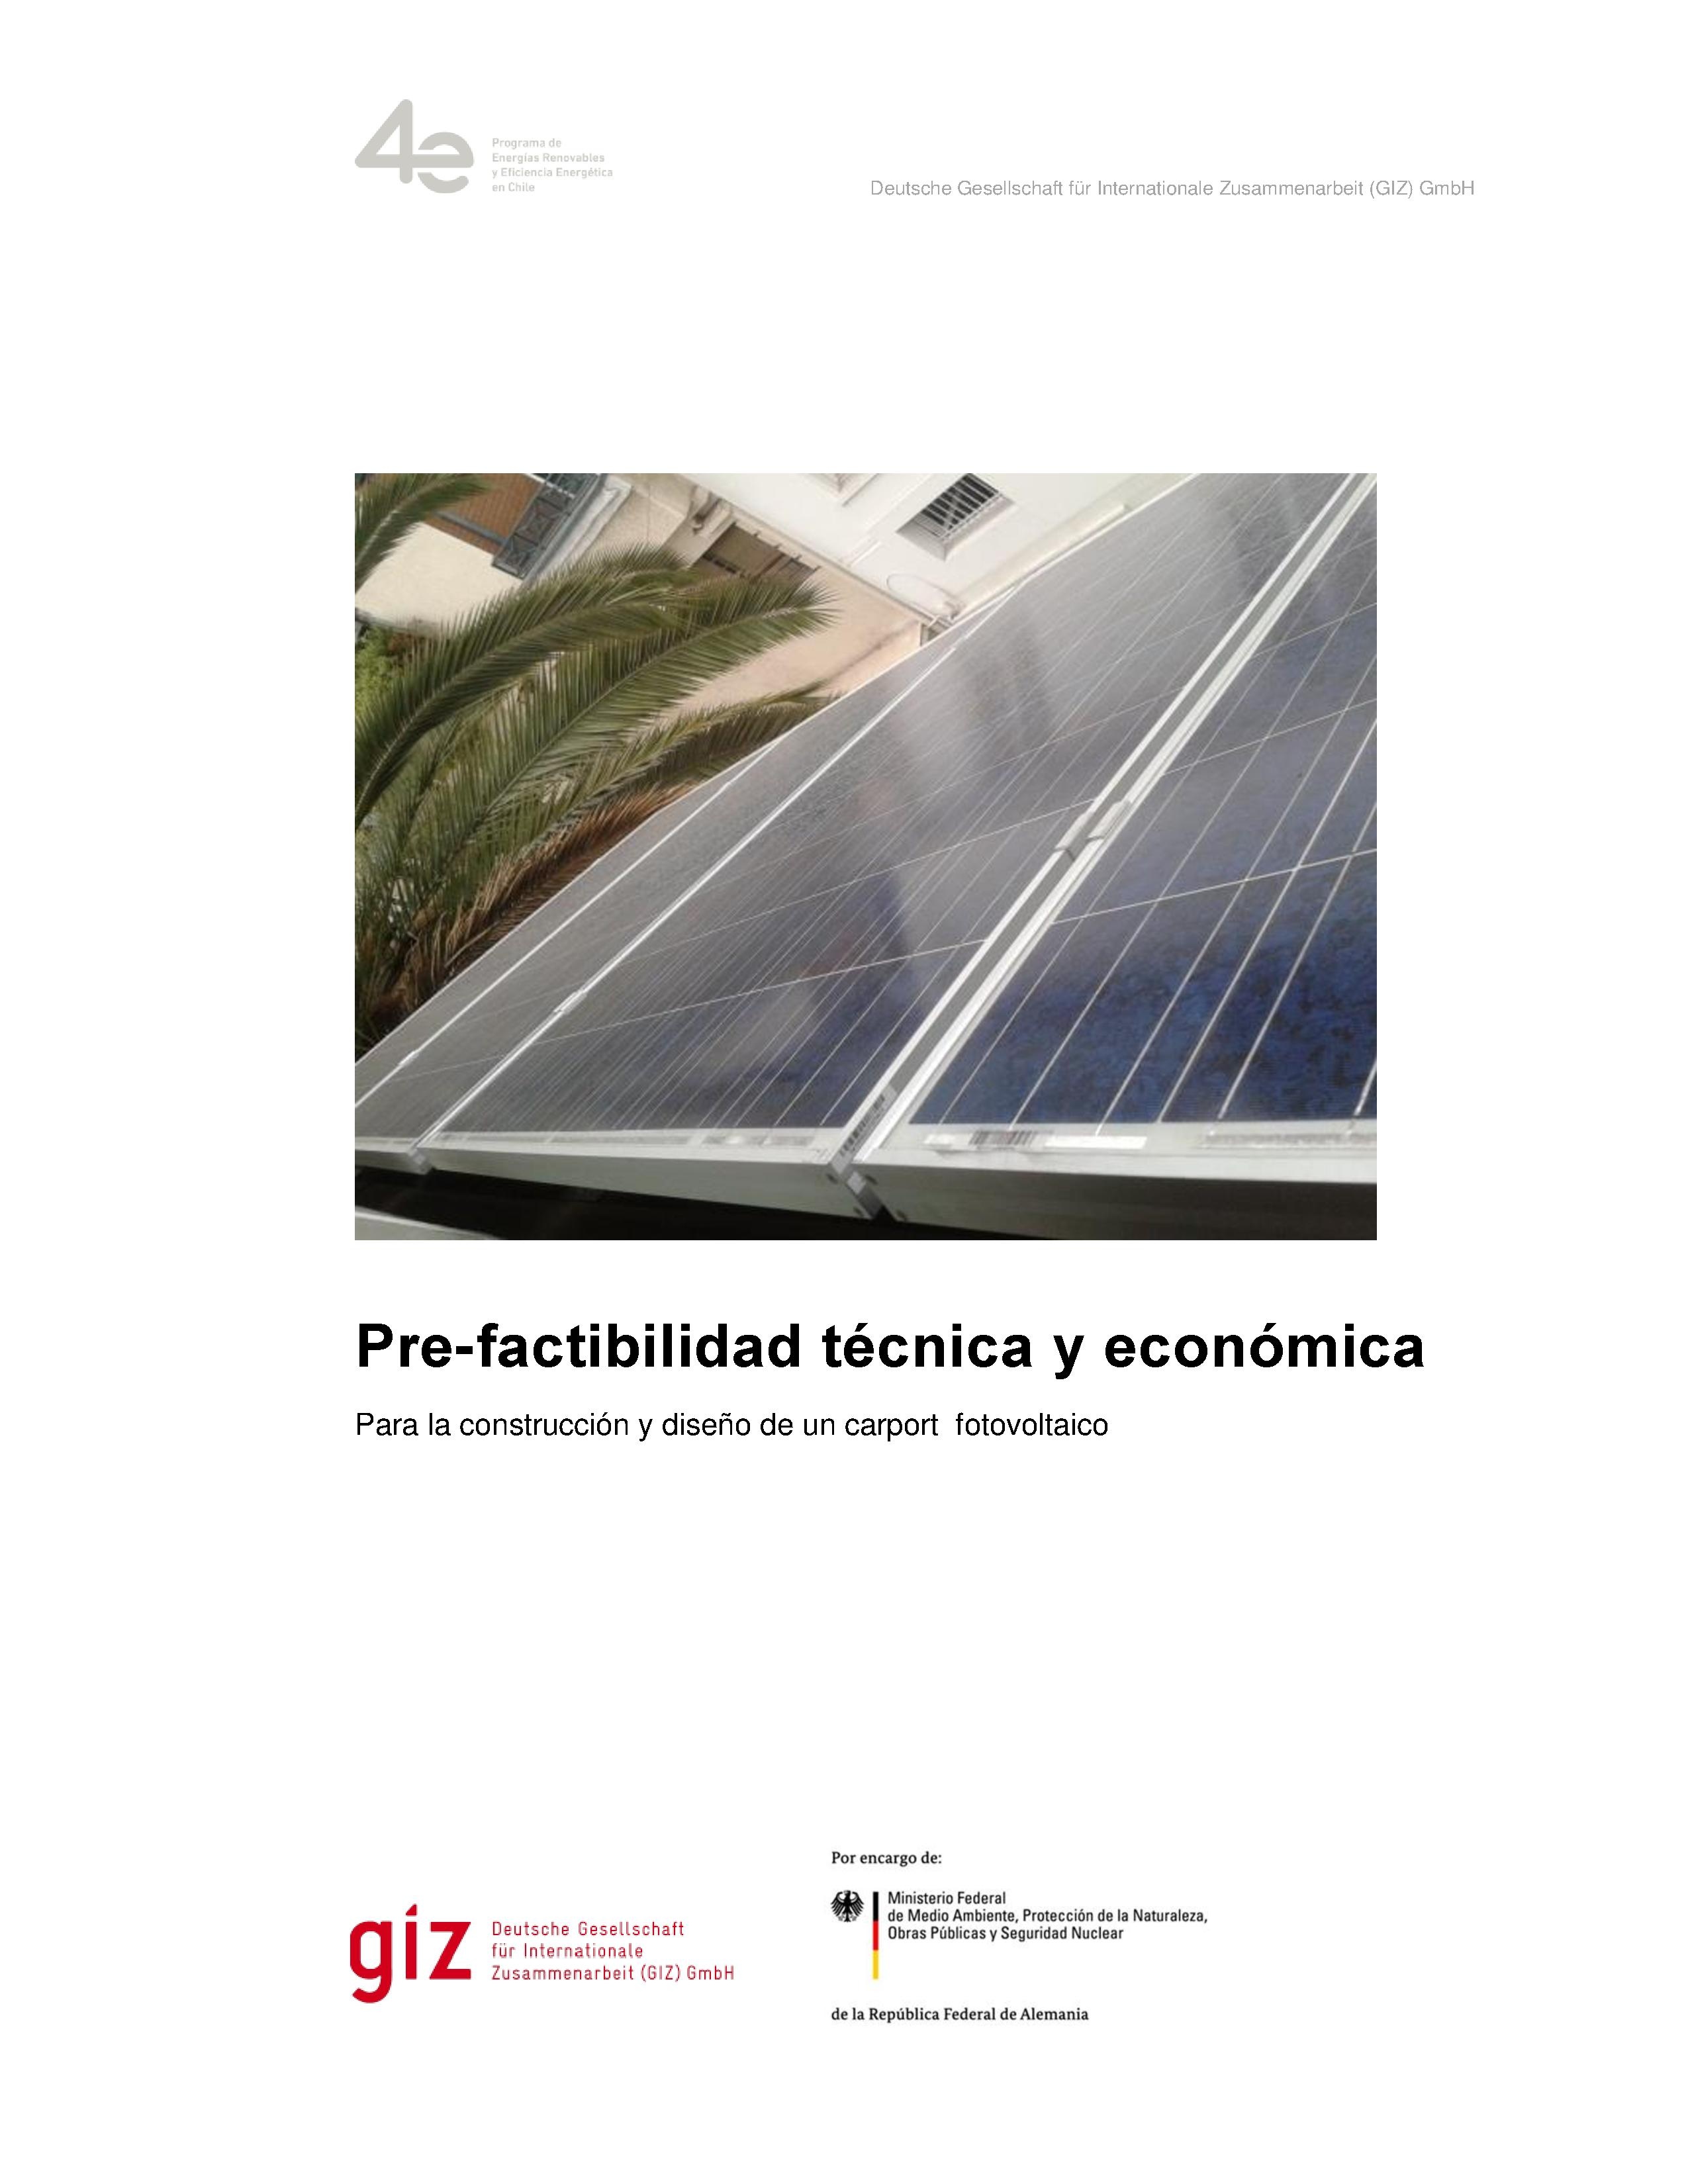 Study of technical and economic feasibility for the construction and design of a photovoltaic carport, 2014